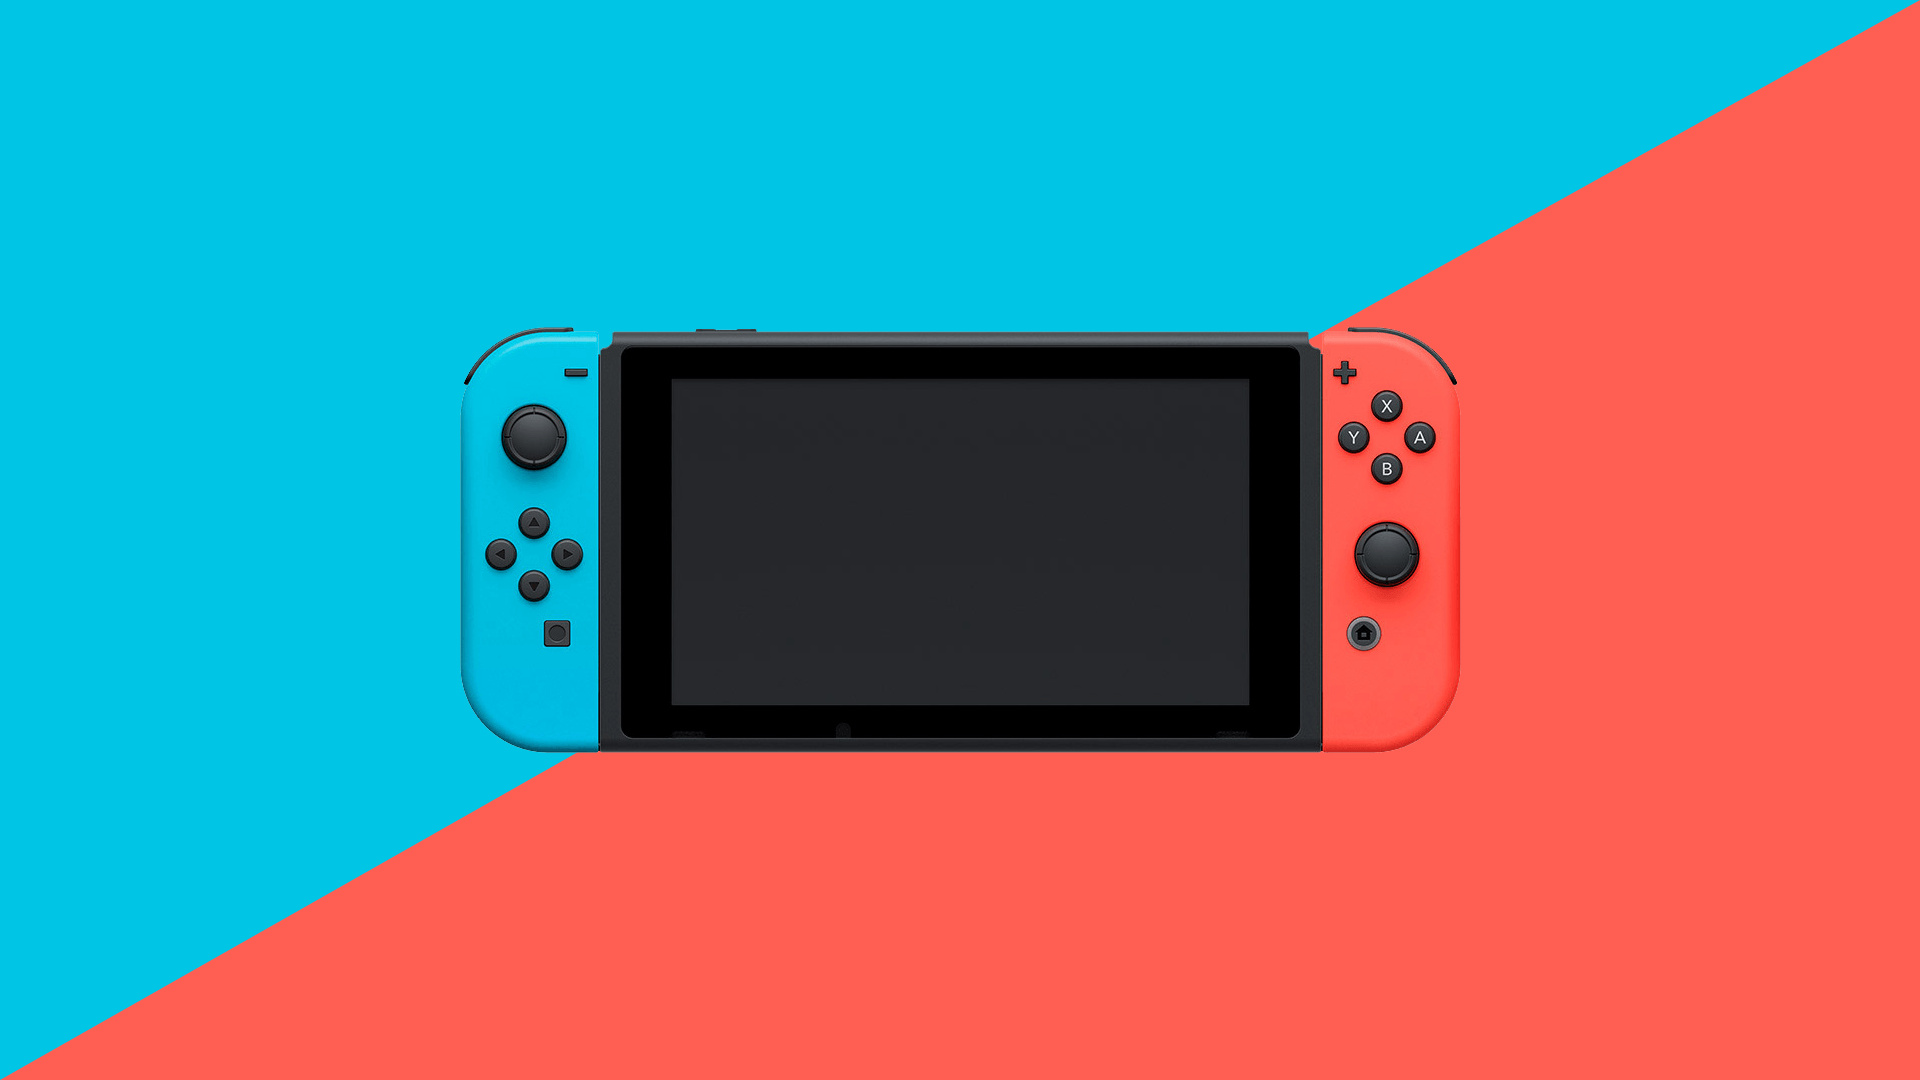 Nintendo switch, Custom wallpapers, Personalized backgrounds, Gaming on the go, 1920x1080 Full HD Desktop